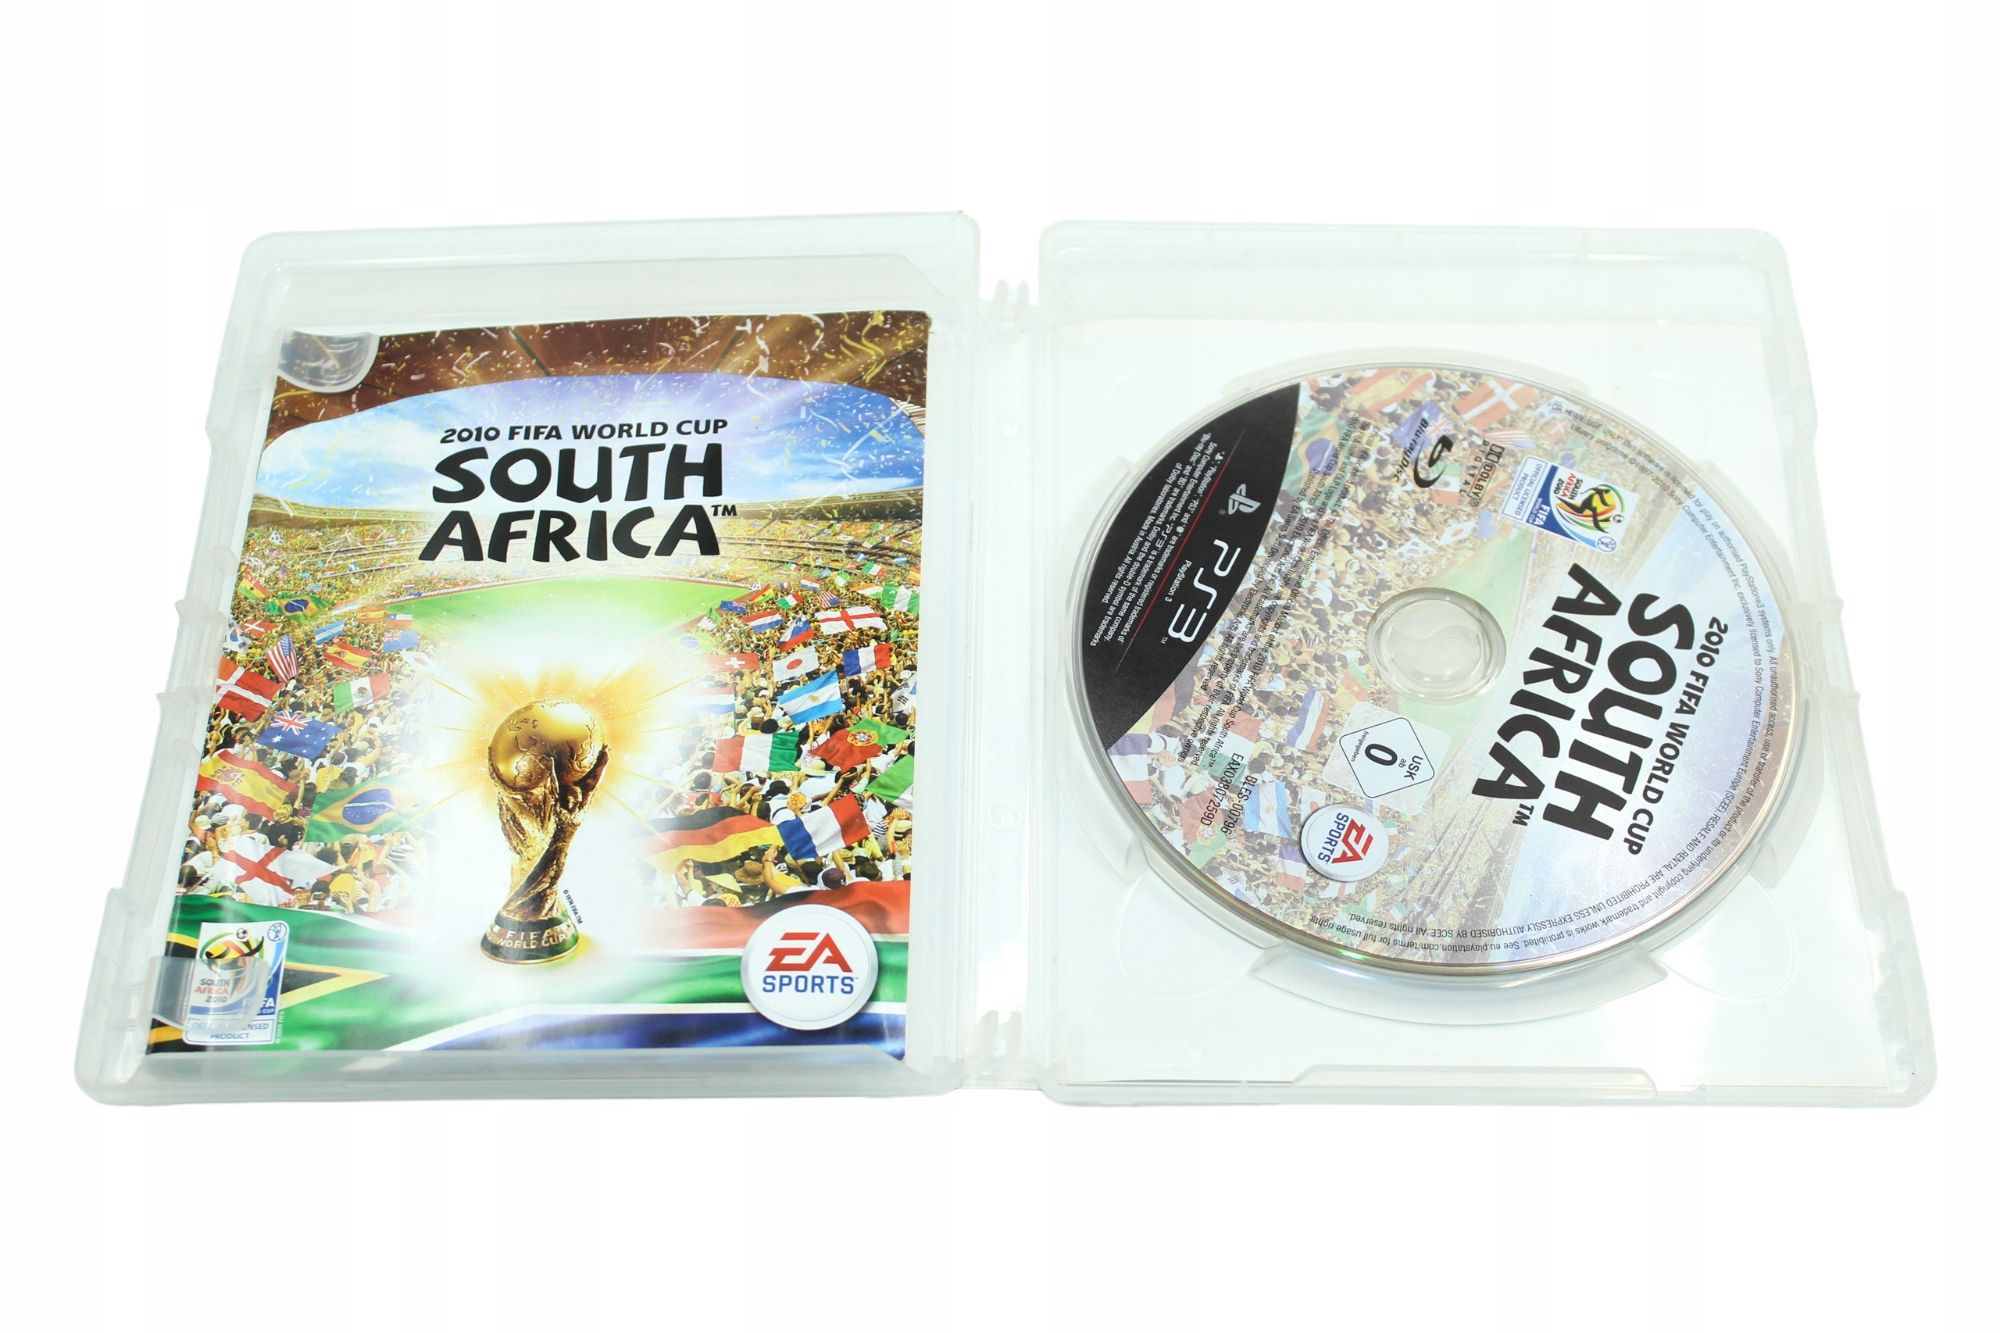 Fifa World Cup: South Africa 2010 PS3 PlayStation 3